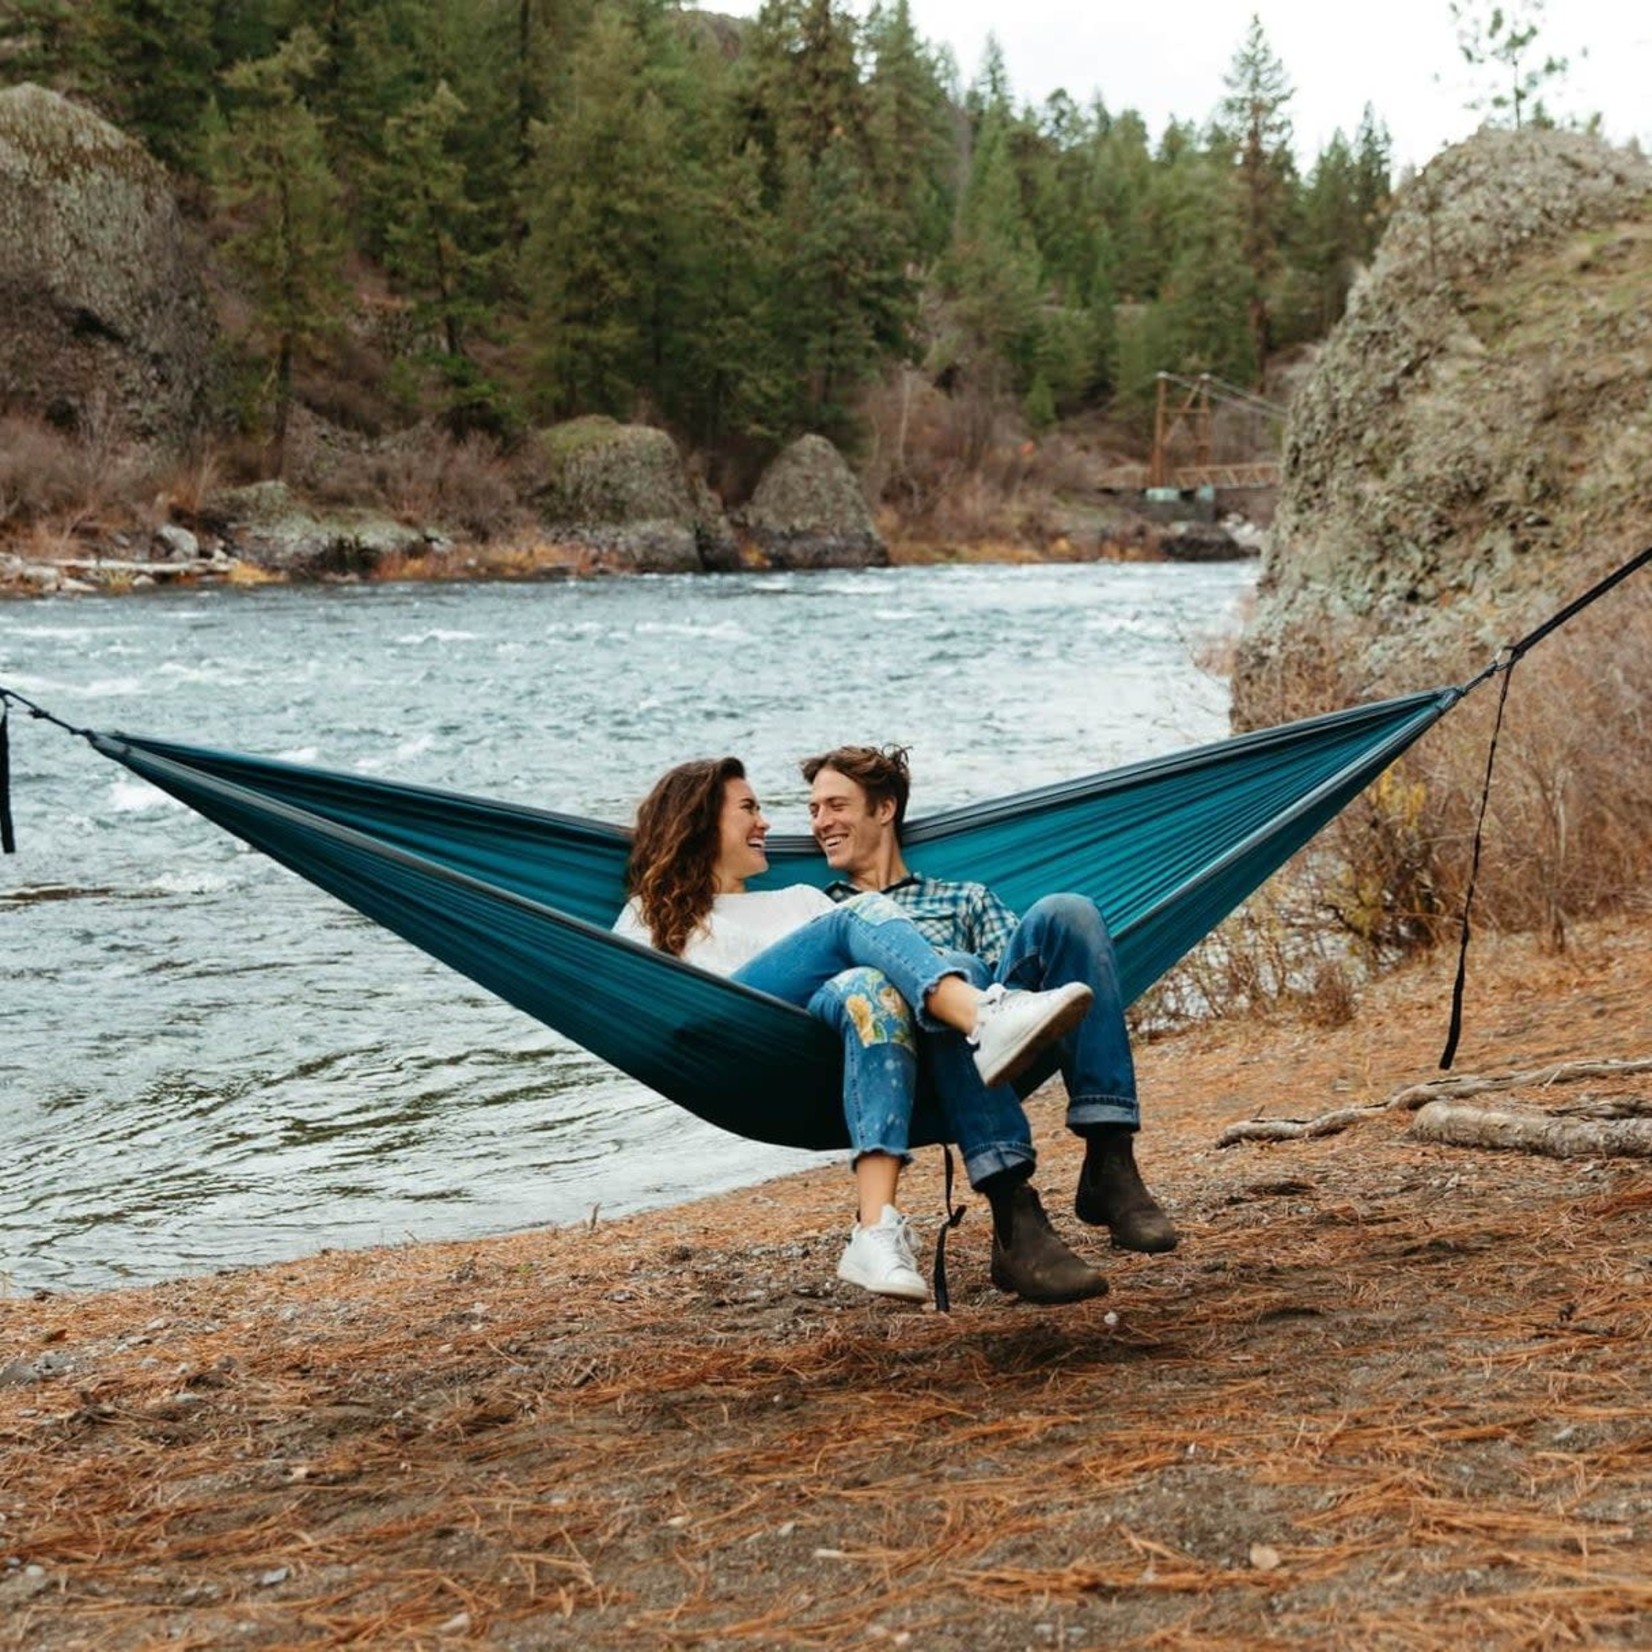 Eagles Nest Outfitters (ENO) Doublenest Hammock